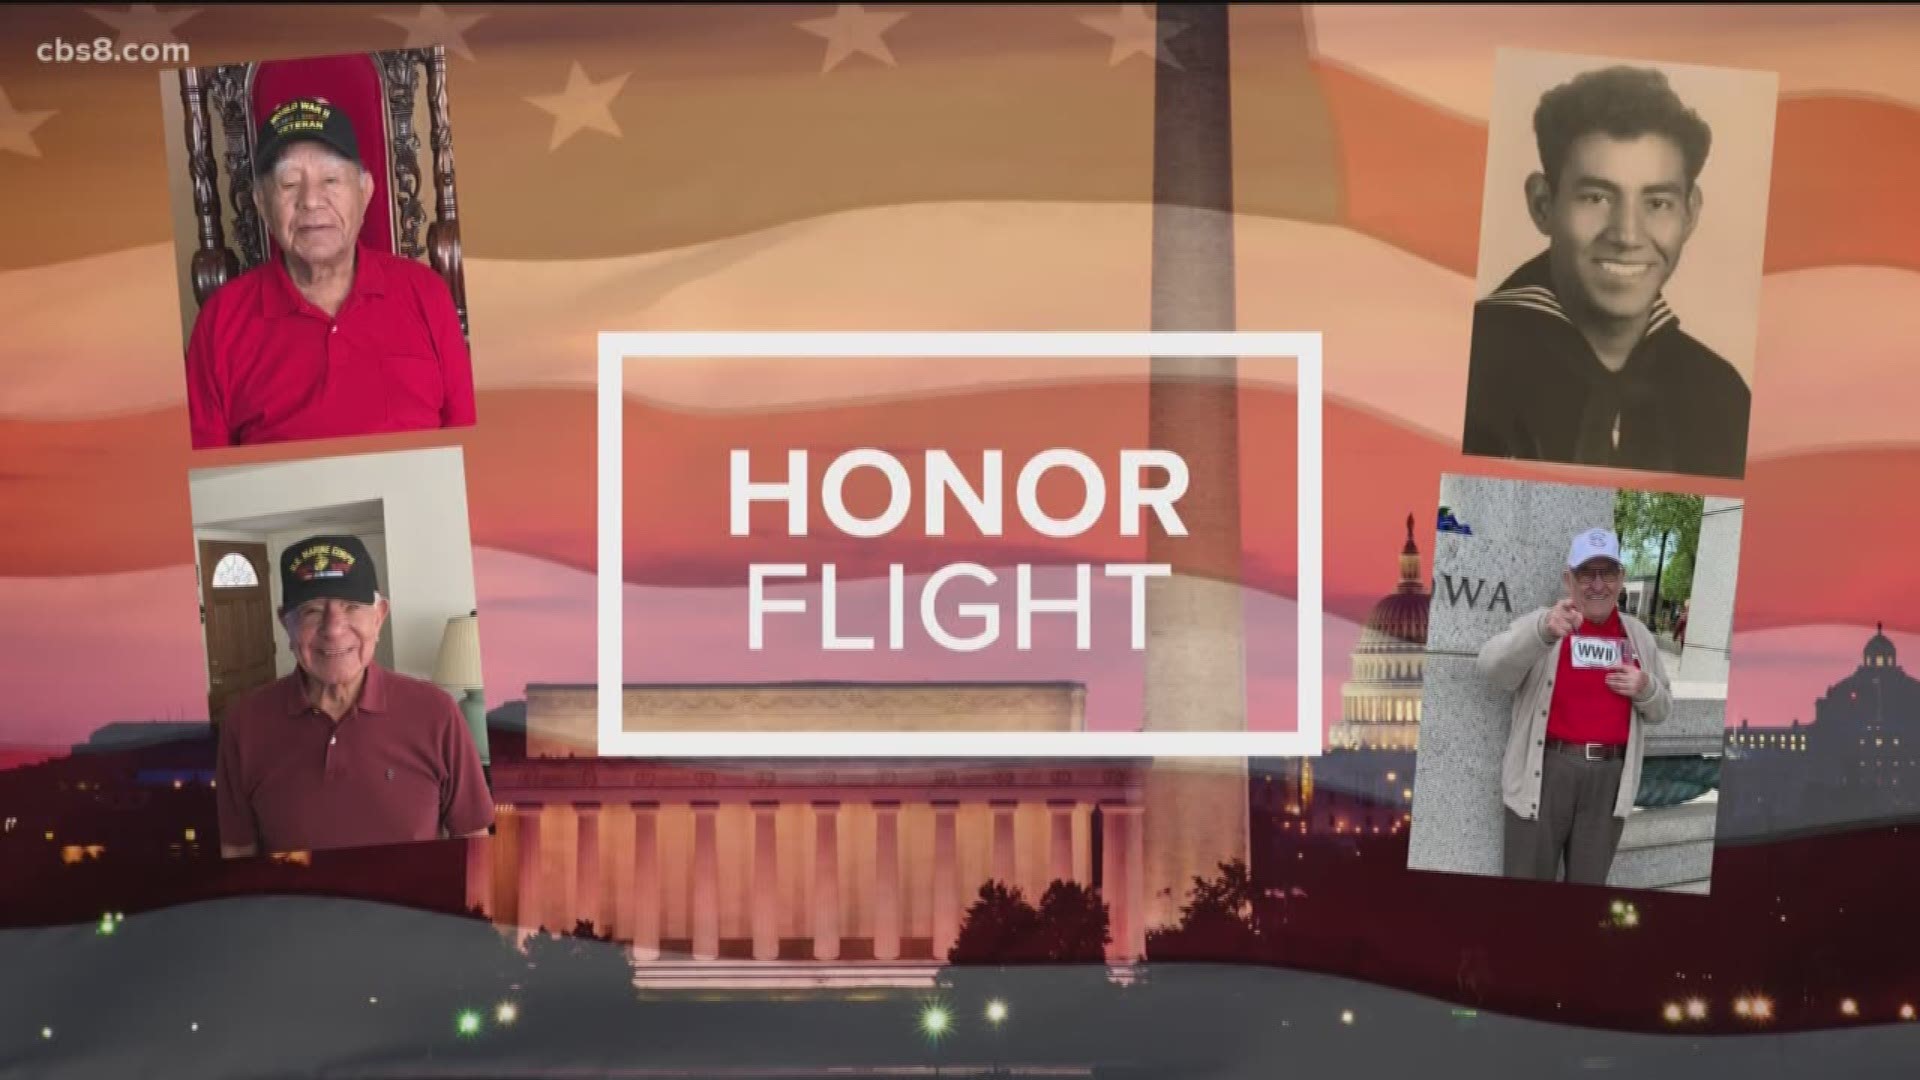 After months in the making, on Sunday News 8 held a Memorial Day special for Honor Flight San Diego.